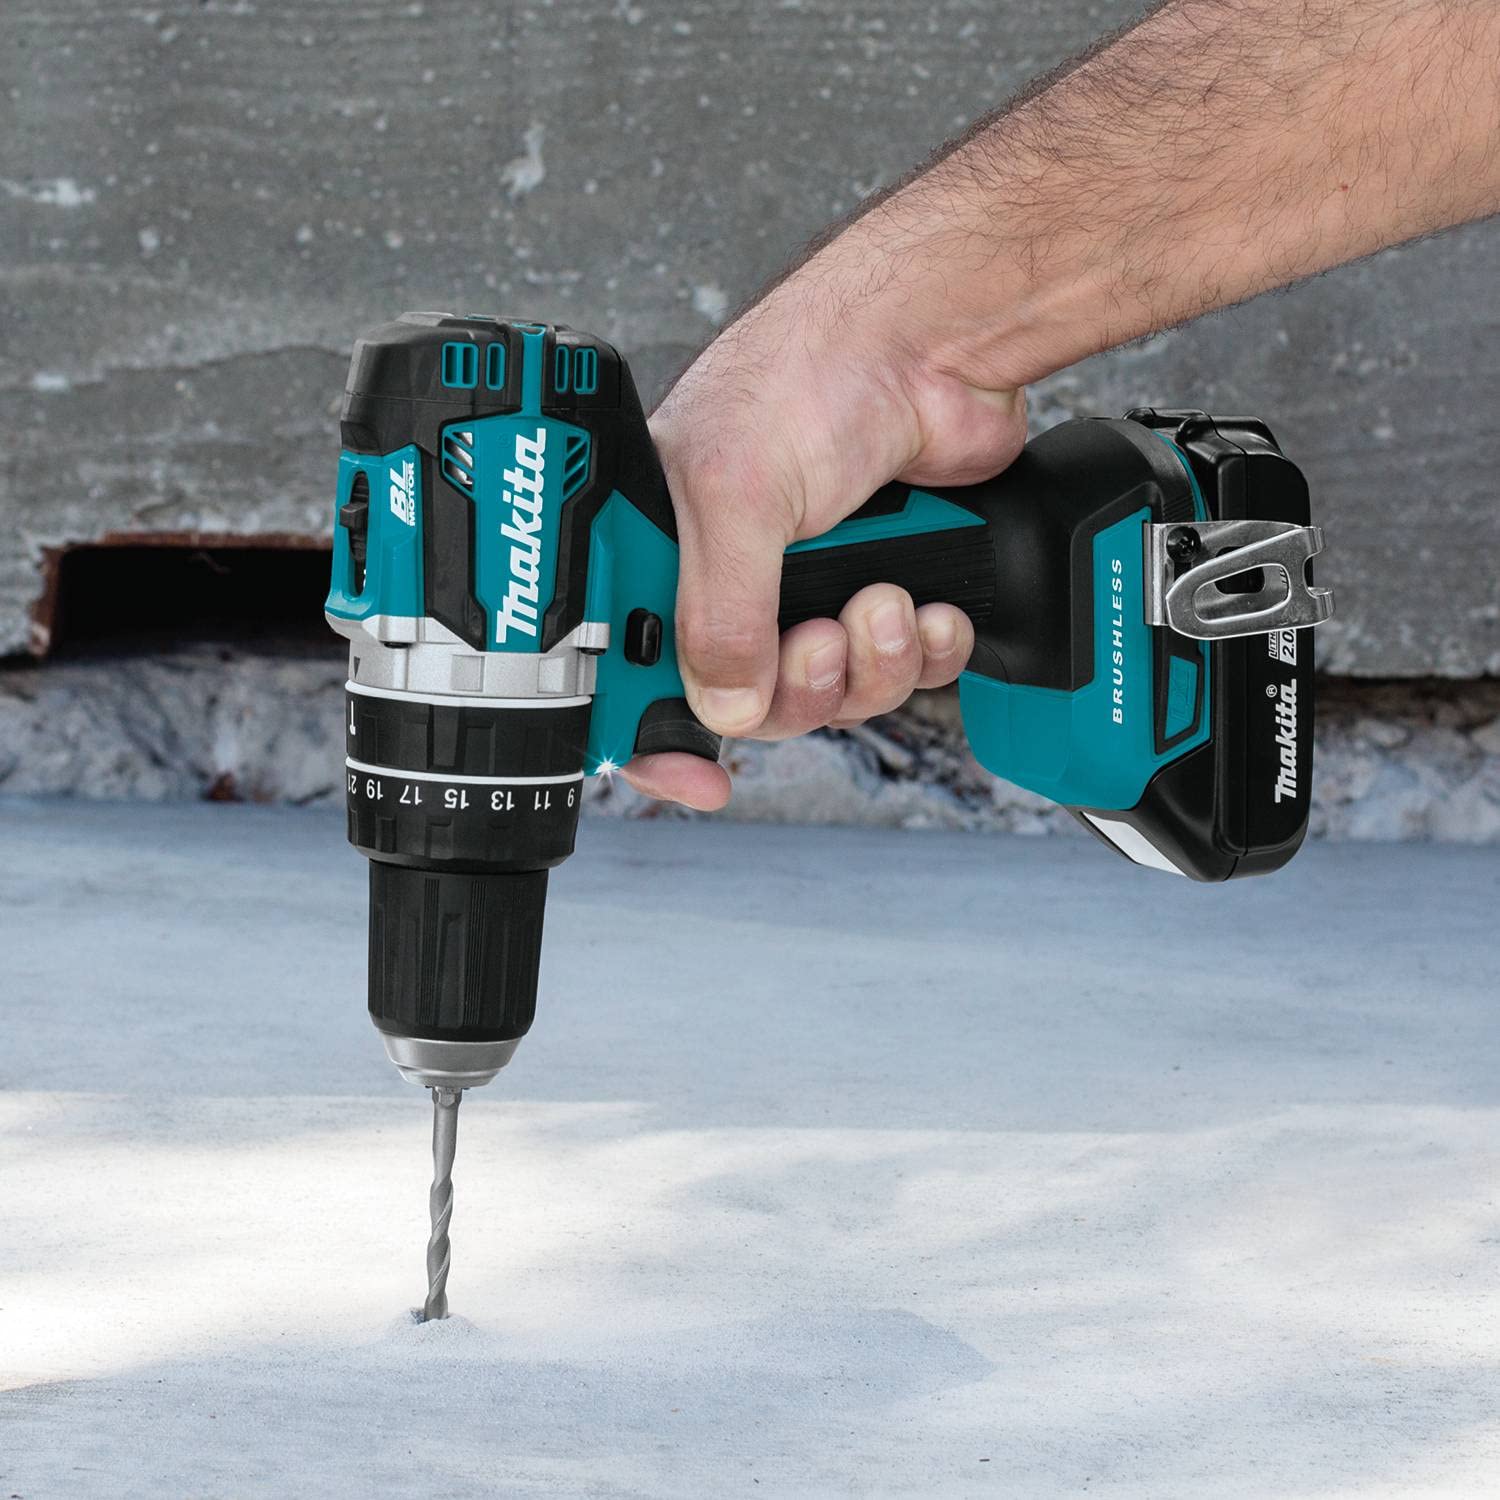 Makita XPH12R 18V LXT Lithium-Ion Compact Brushless Cordless 1/2